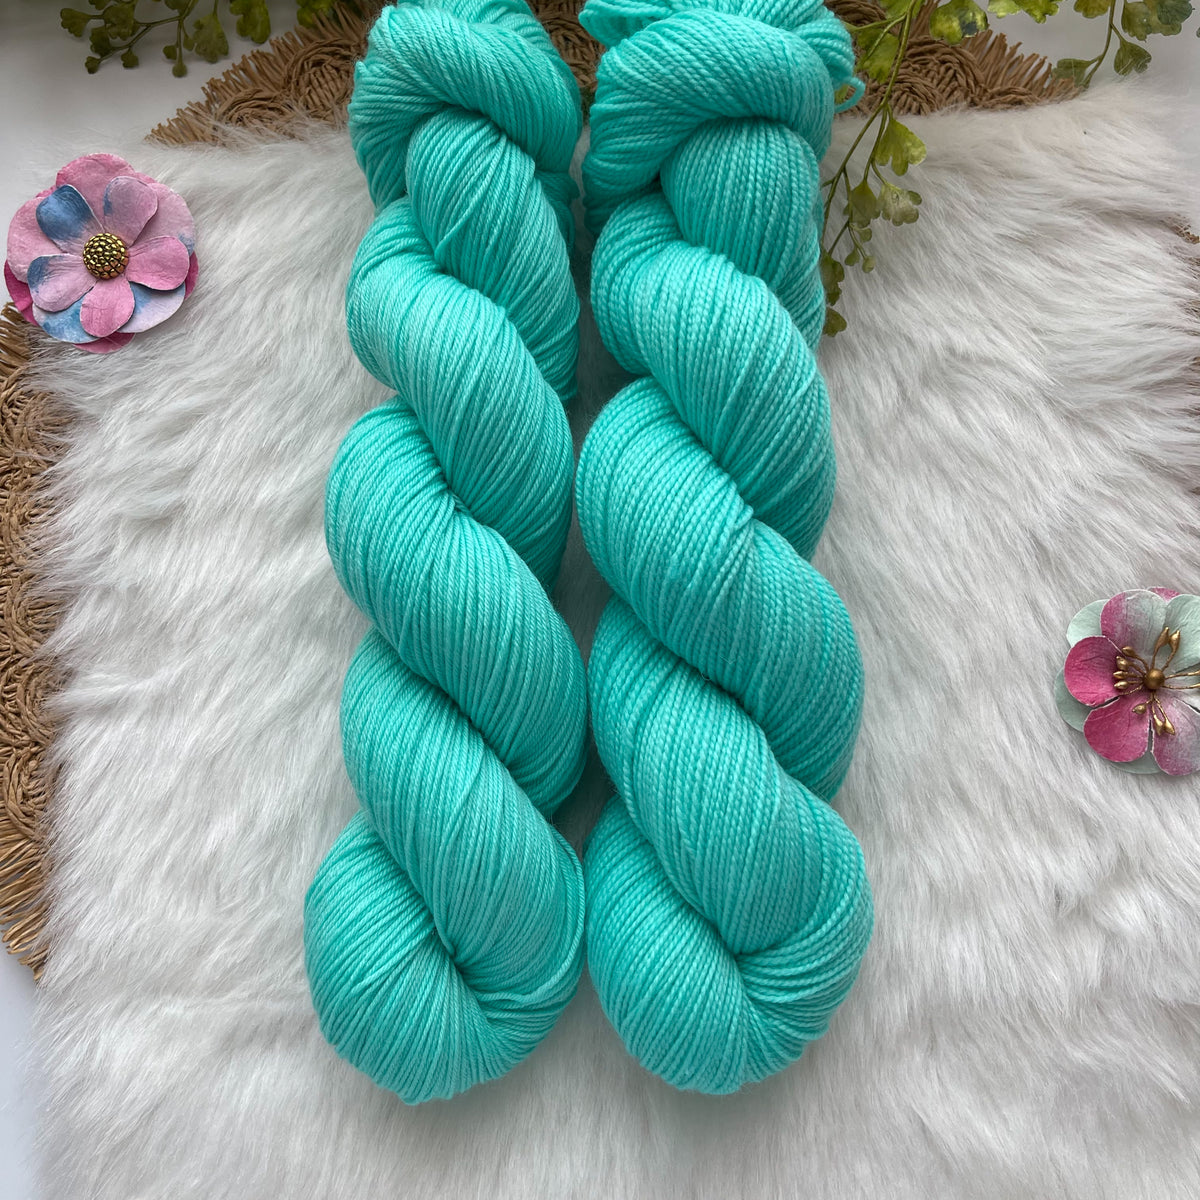 SWEET NOTHINGS - Dyed to Order - Hand Dyed Yarn Skein